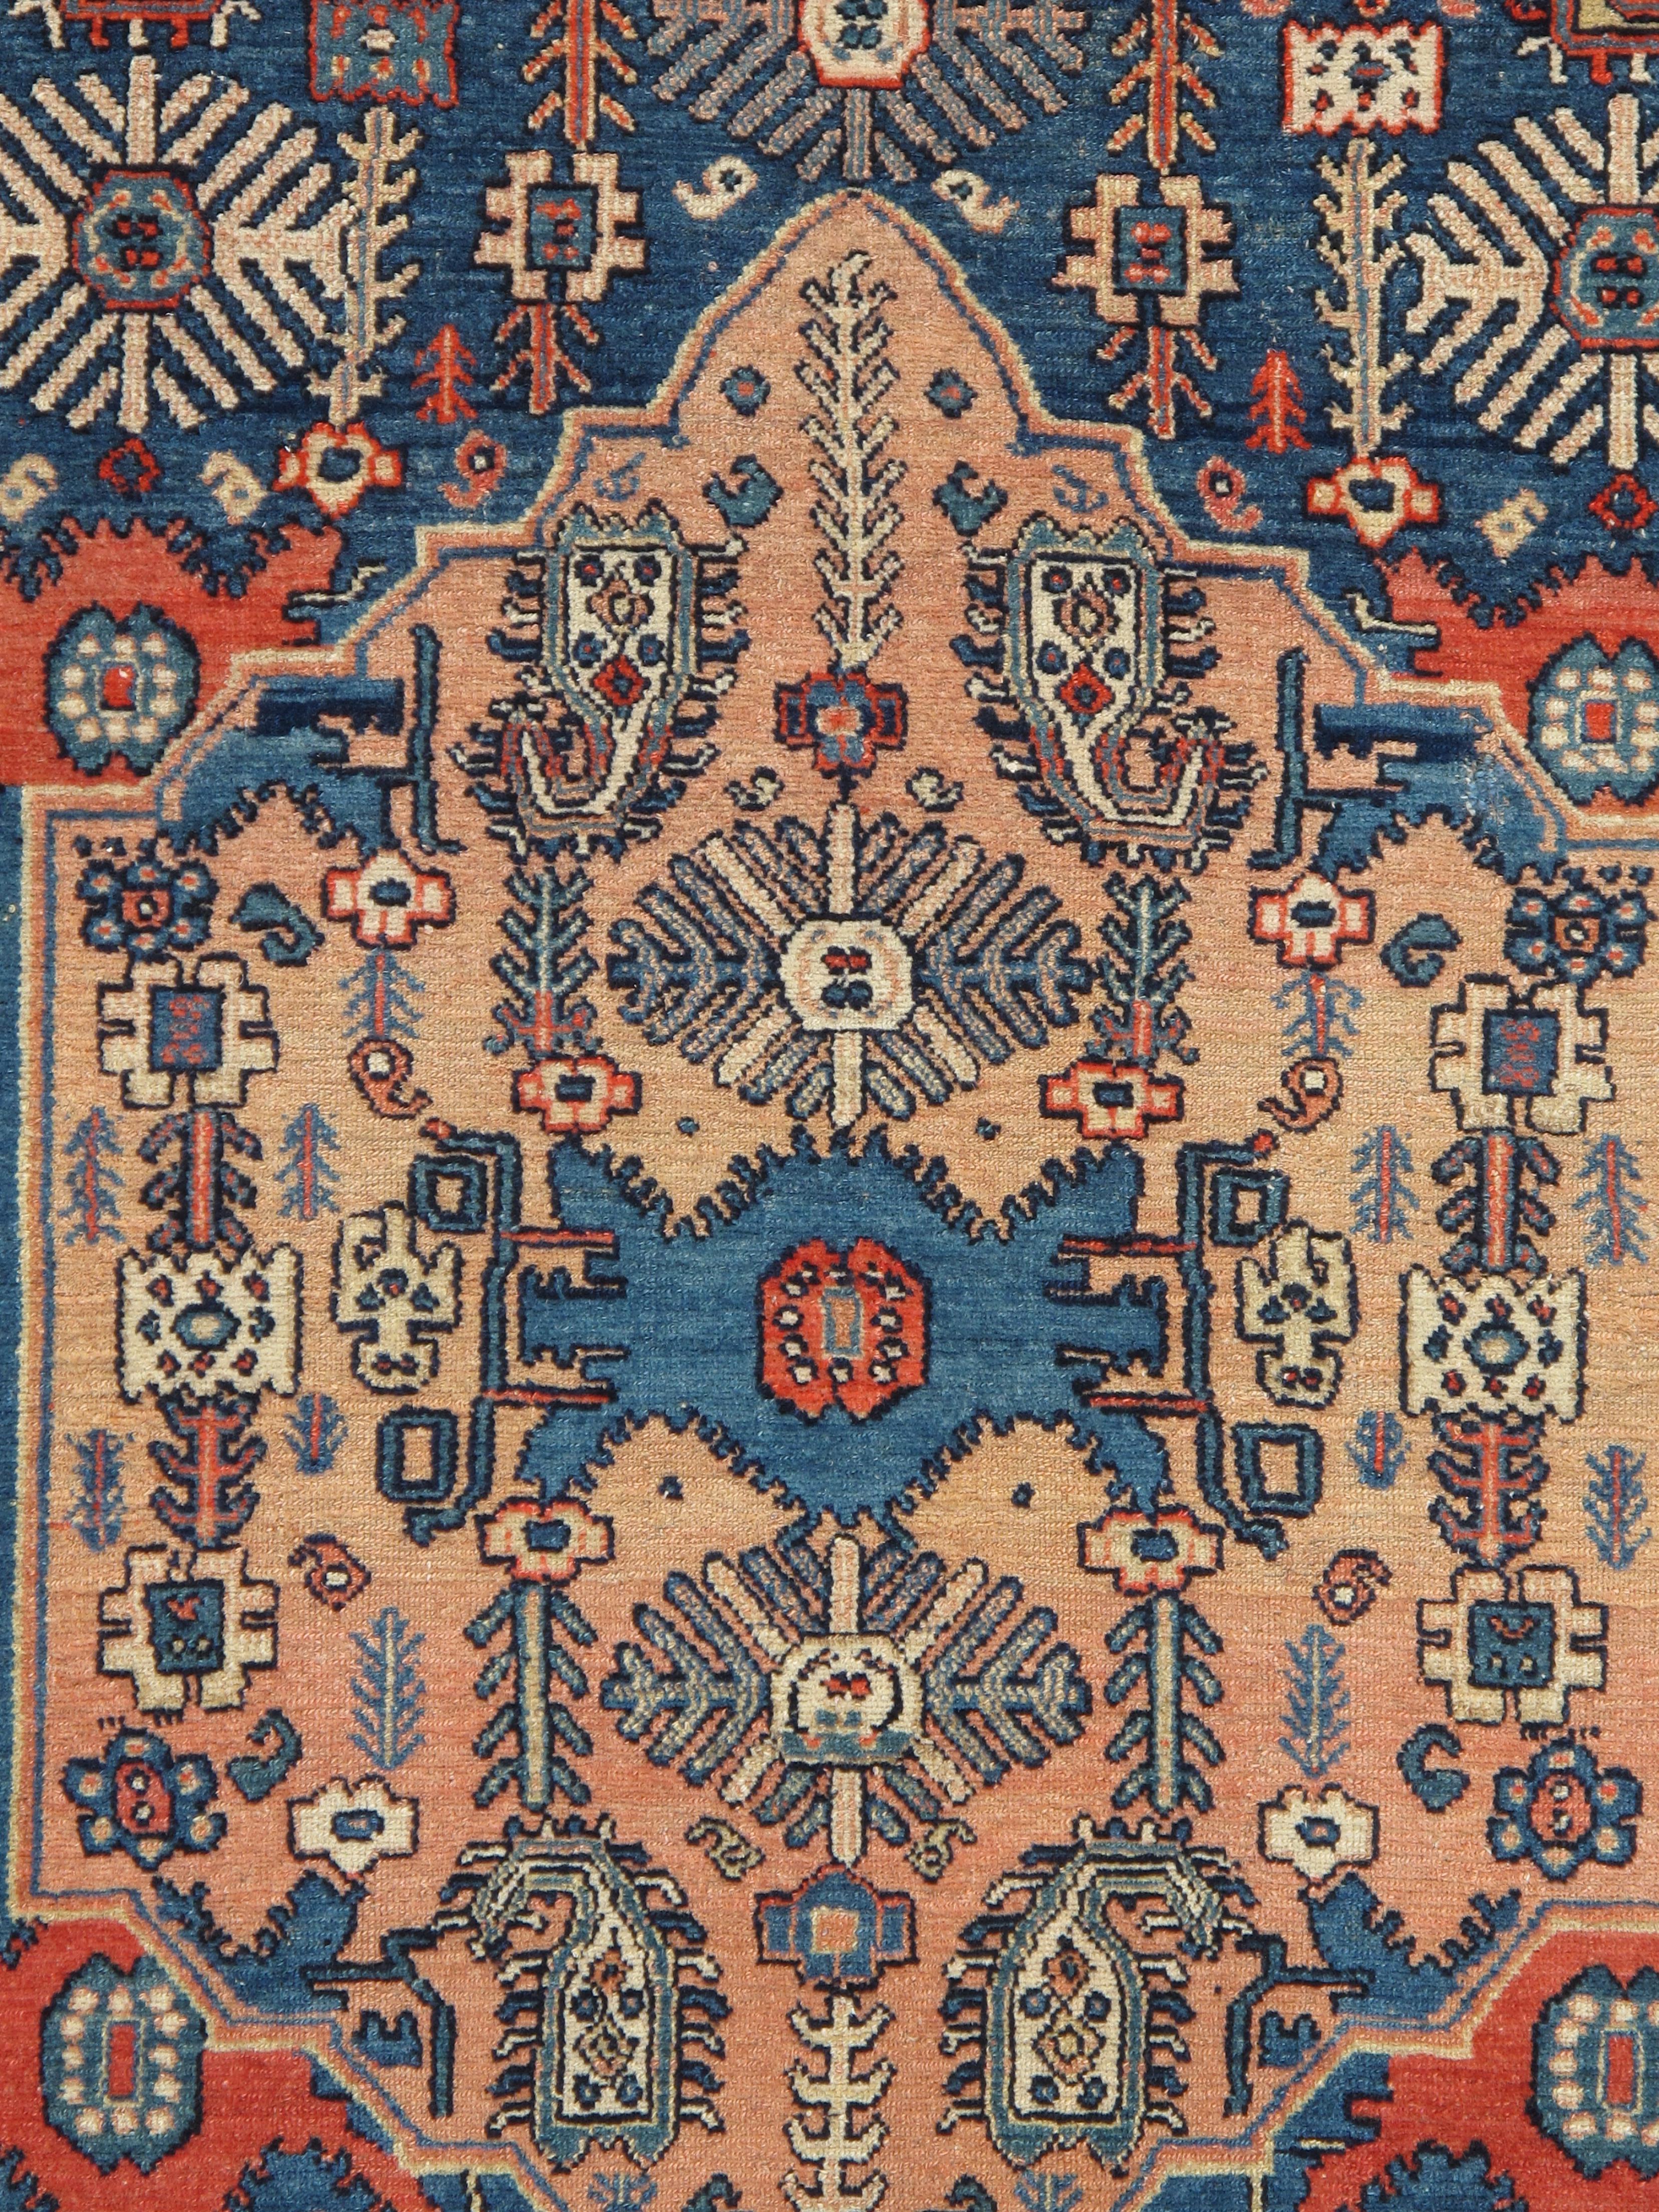 Hand-Woven Antique Senneh Rug with Multicolored Silk Warp, Handmade, Ivory, Red, Light Blue For Sale